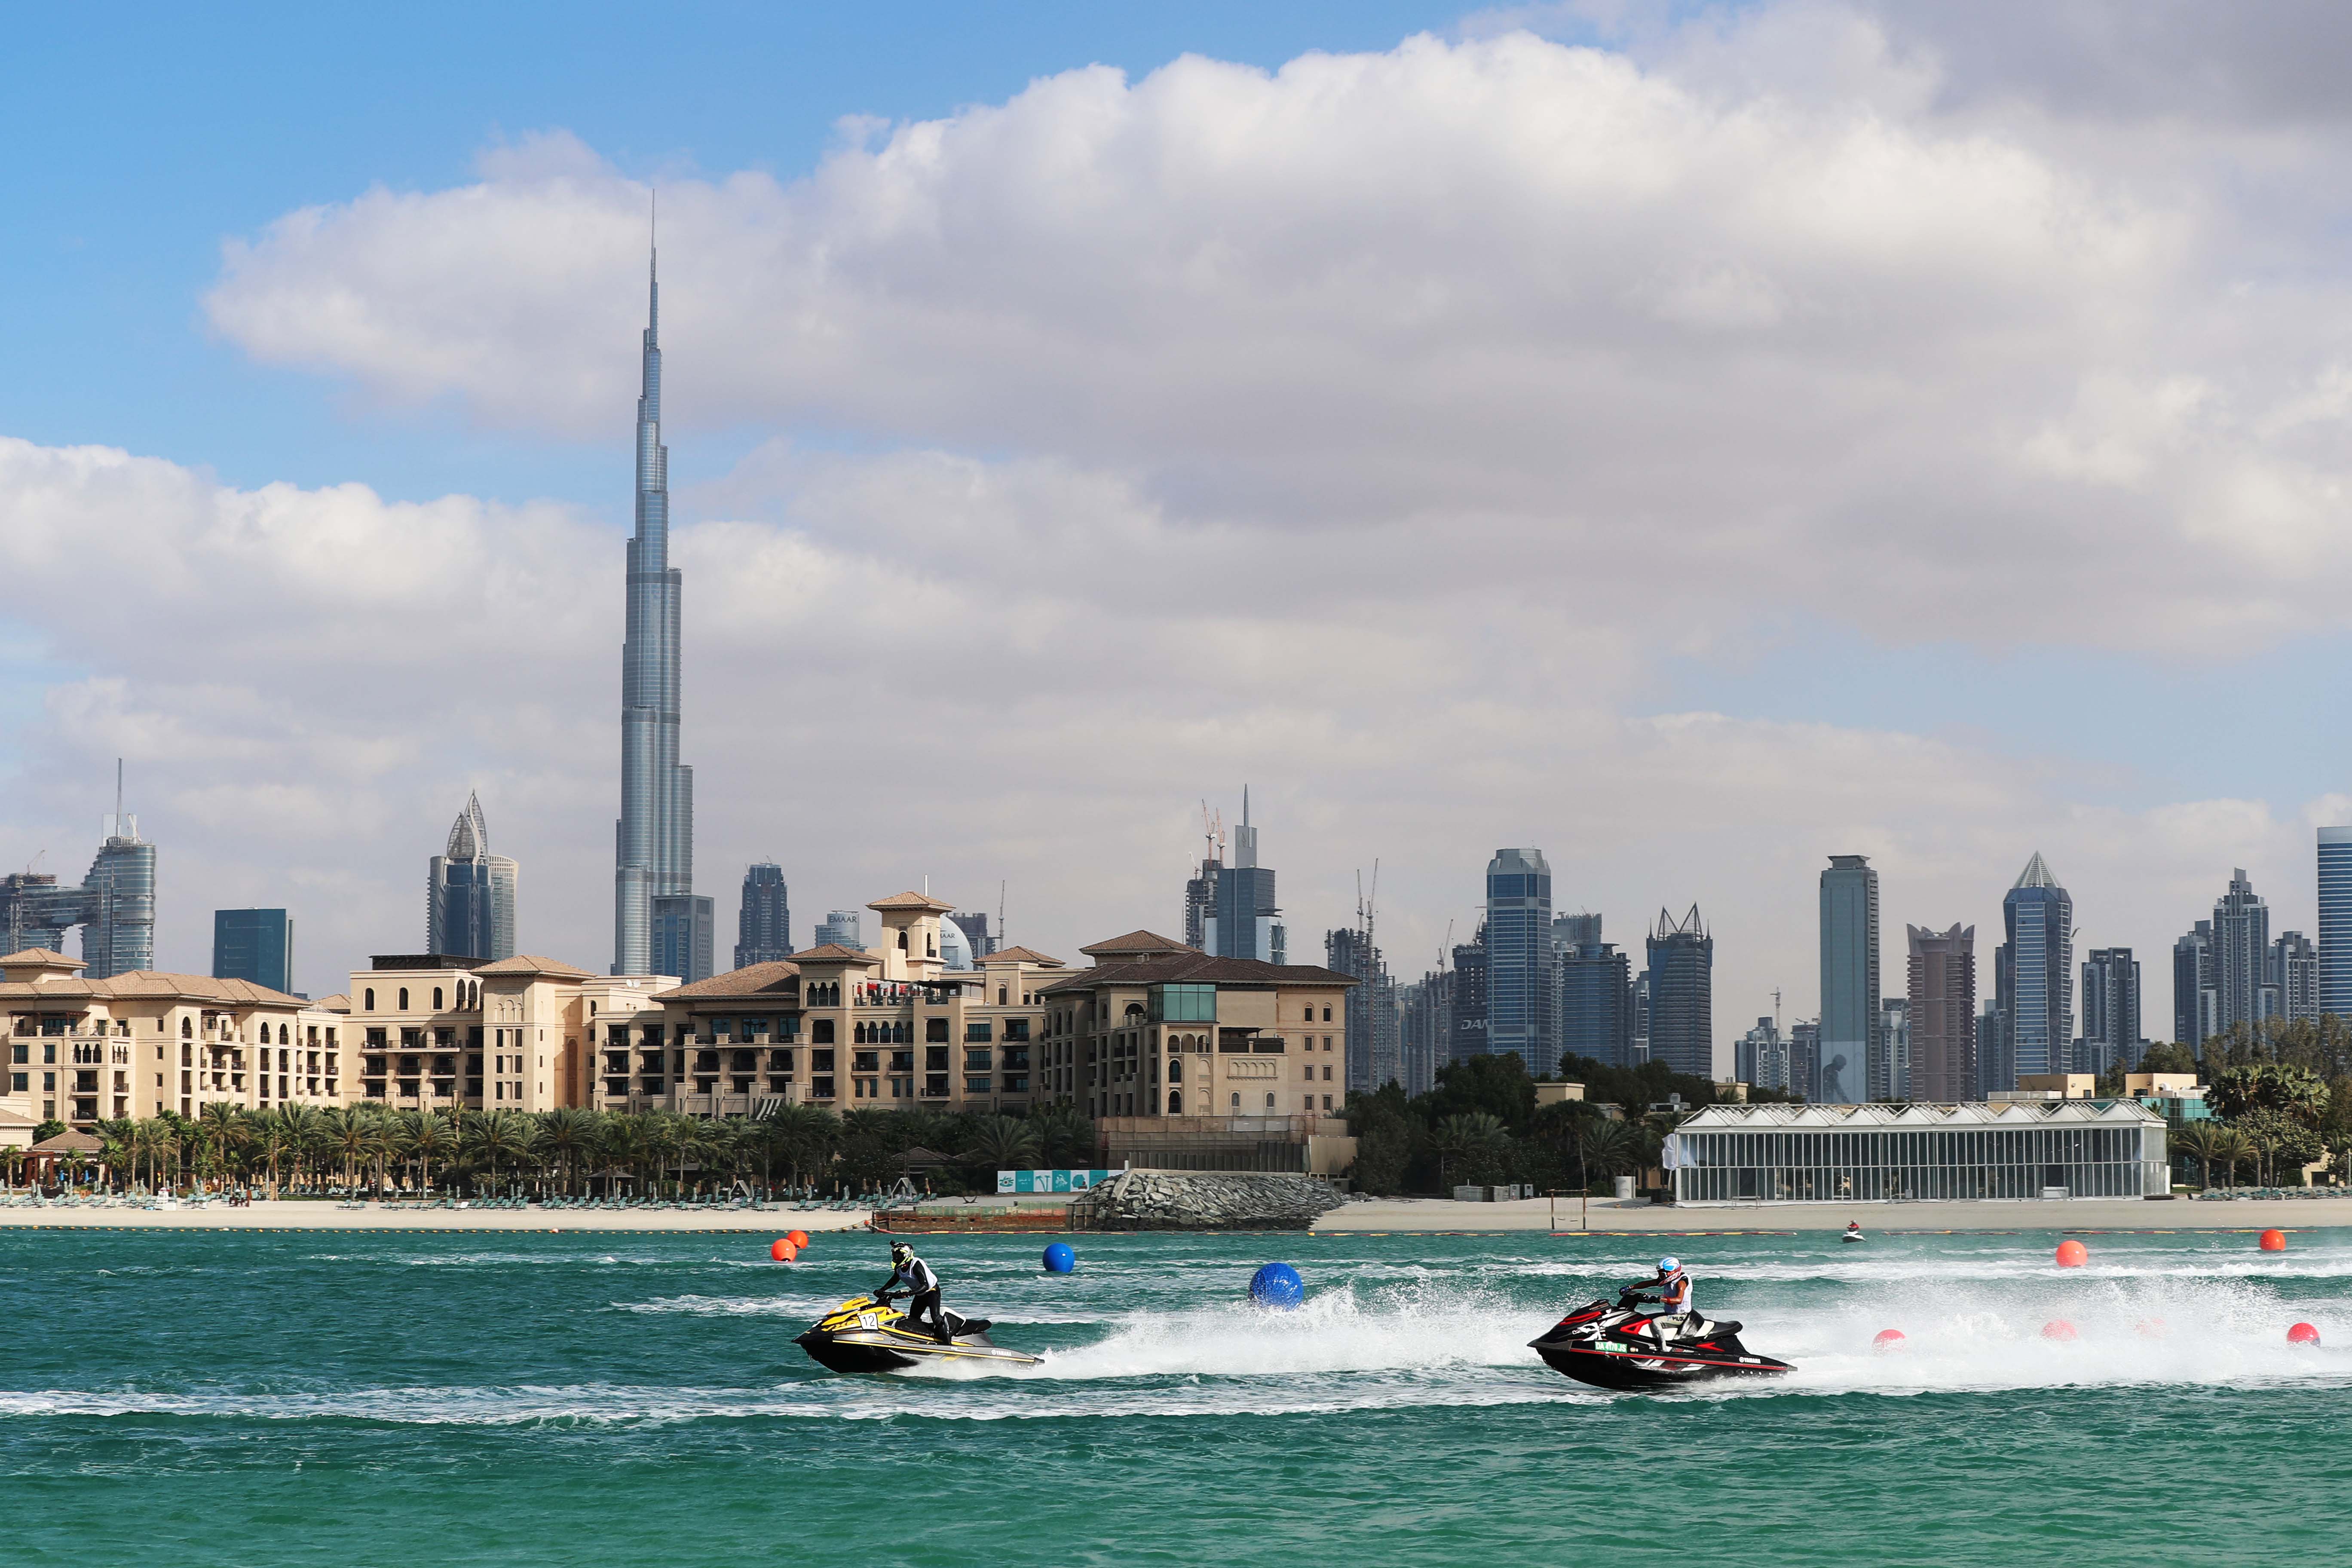 12 Categories to Compete in UAE Int'l Aquabike Race on Saturday